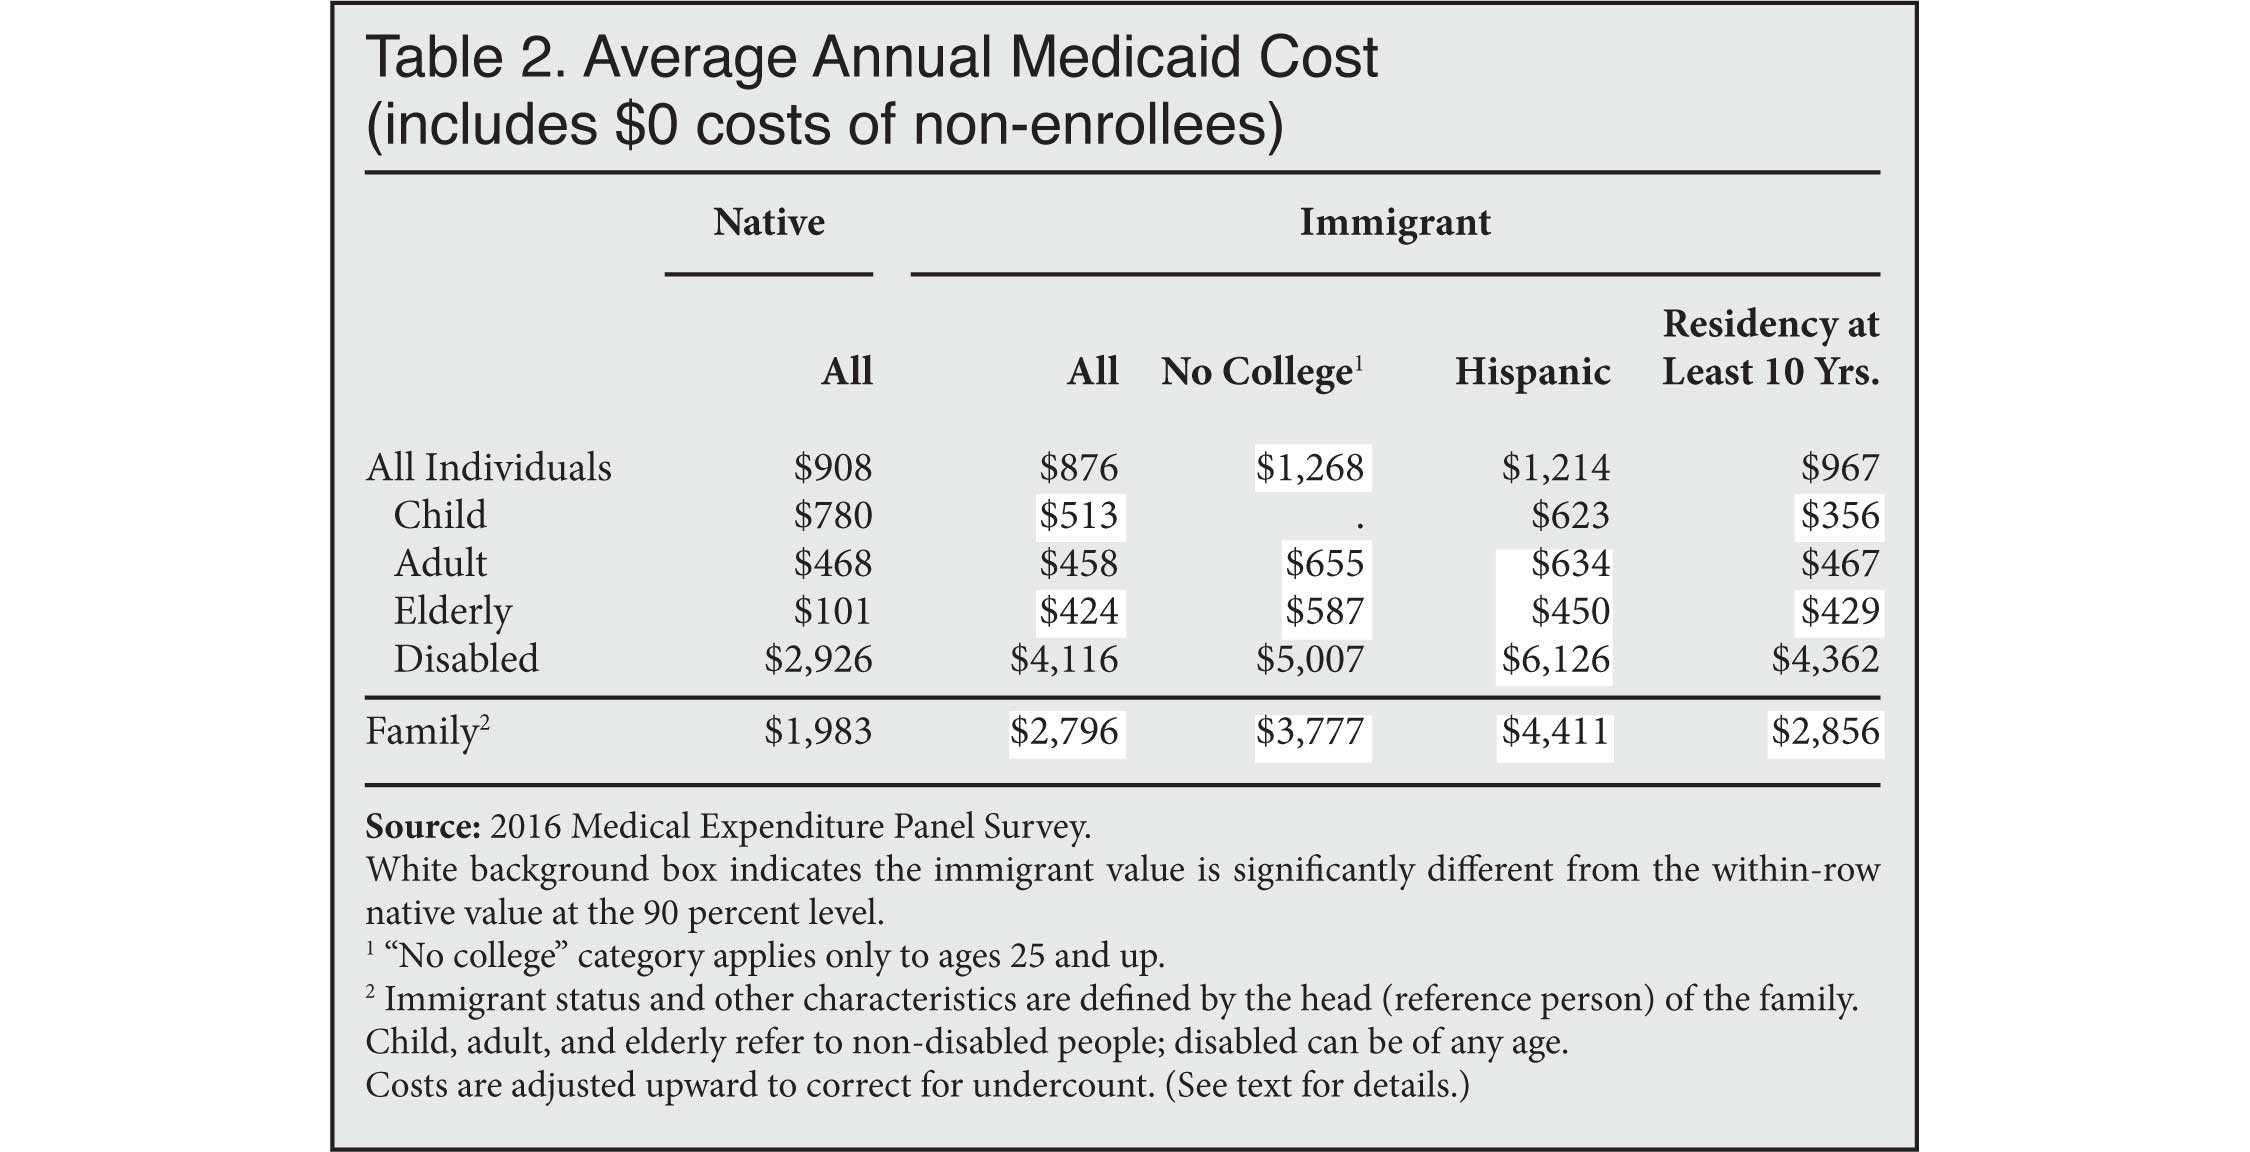 Table: Average Annual Medicaid Costs, Immigrant and Natives